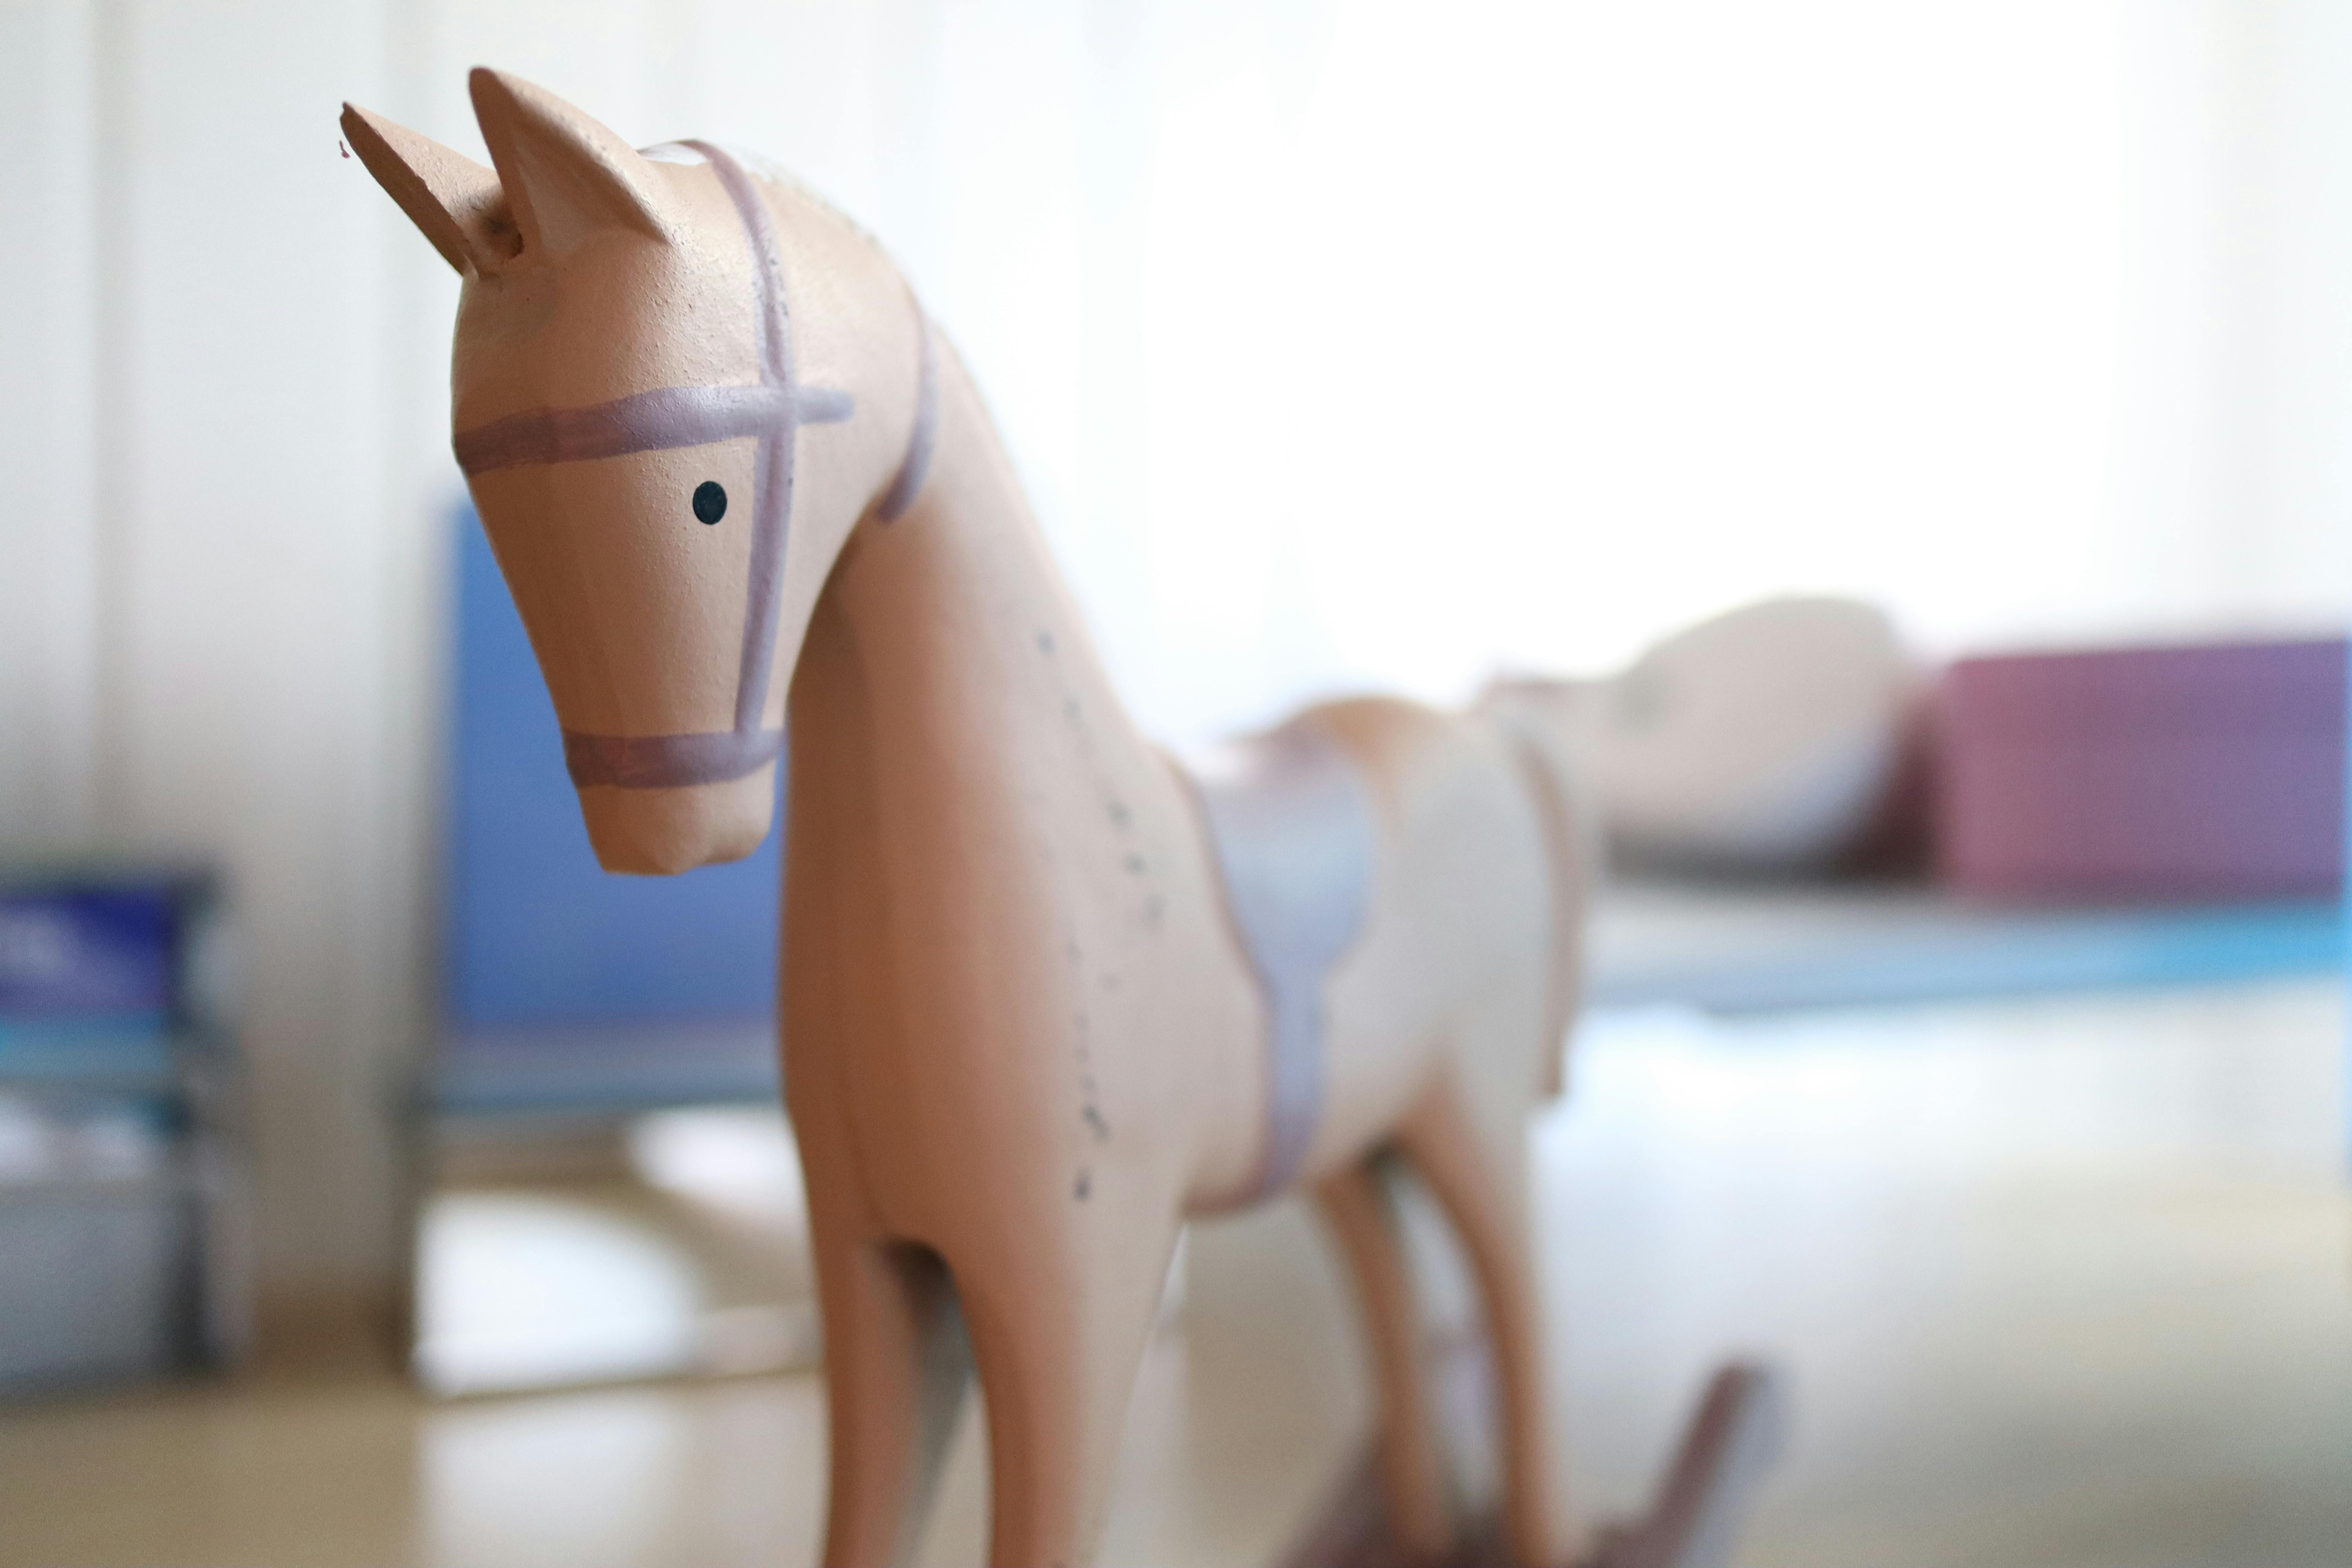 miniature wooden rocking horse toy